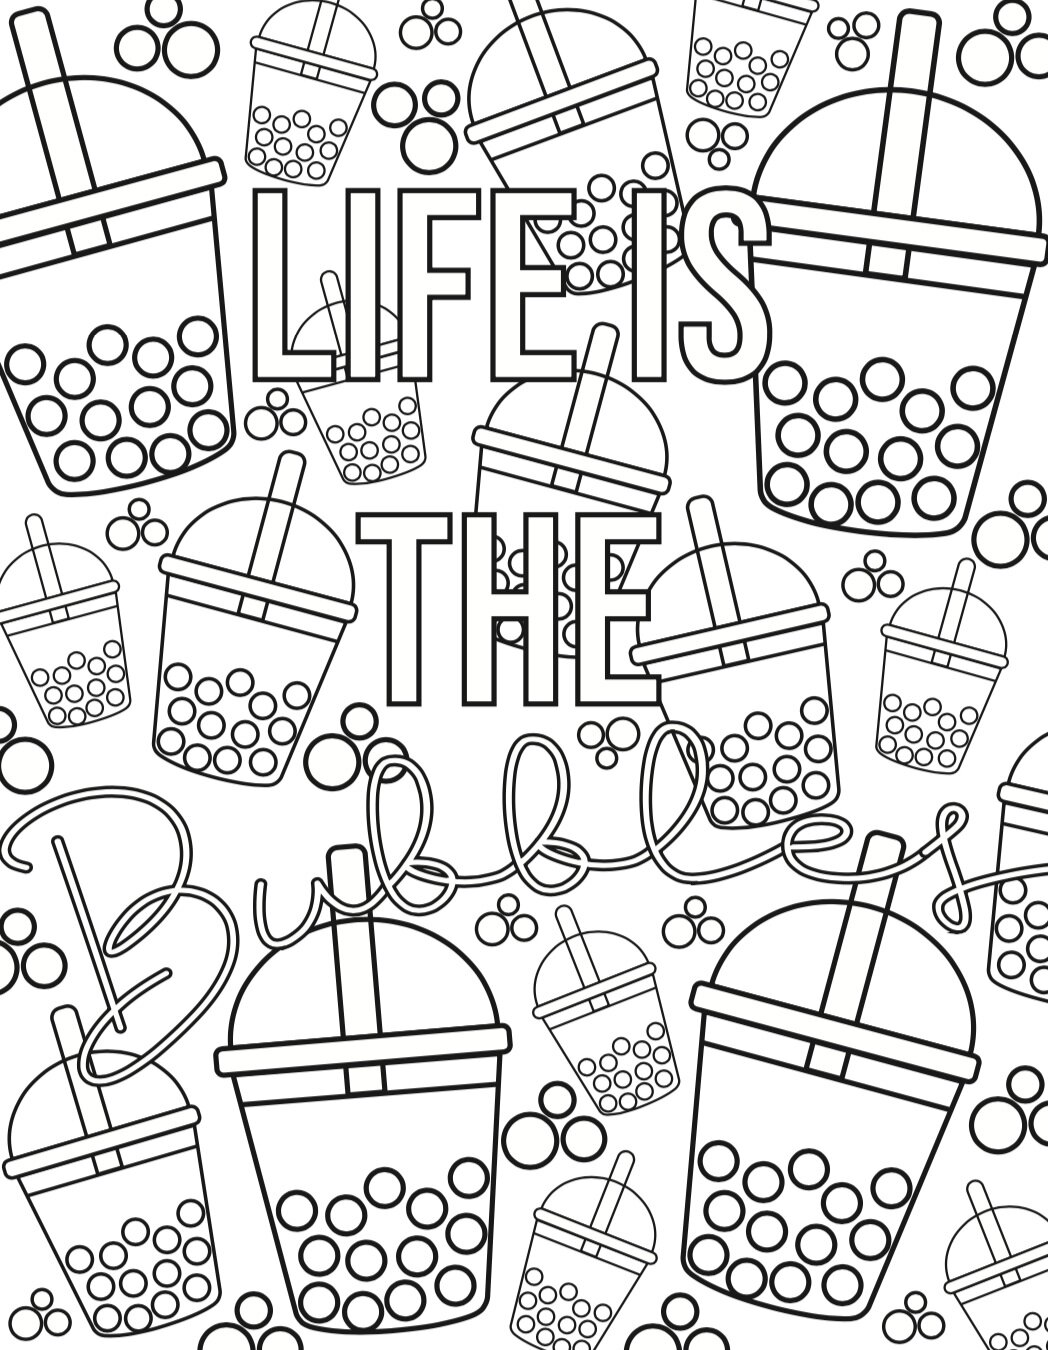 FREE DOWNLOAD  Bubble Tea Colouring Page — Crafternoon